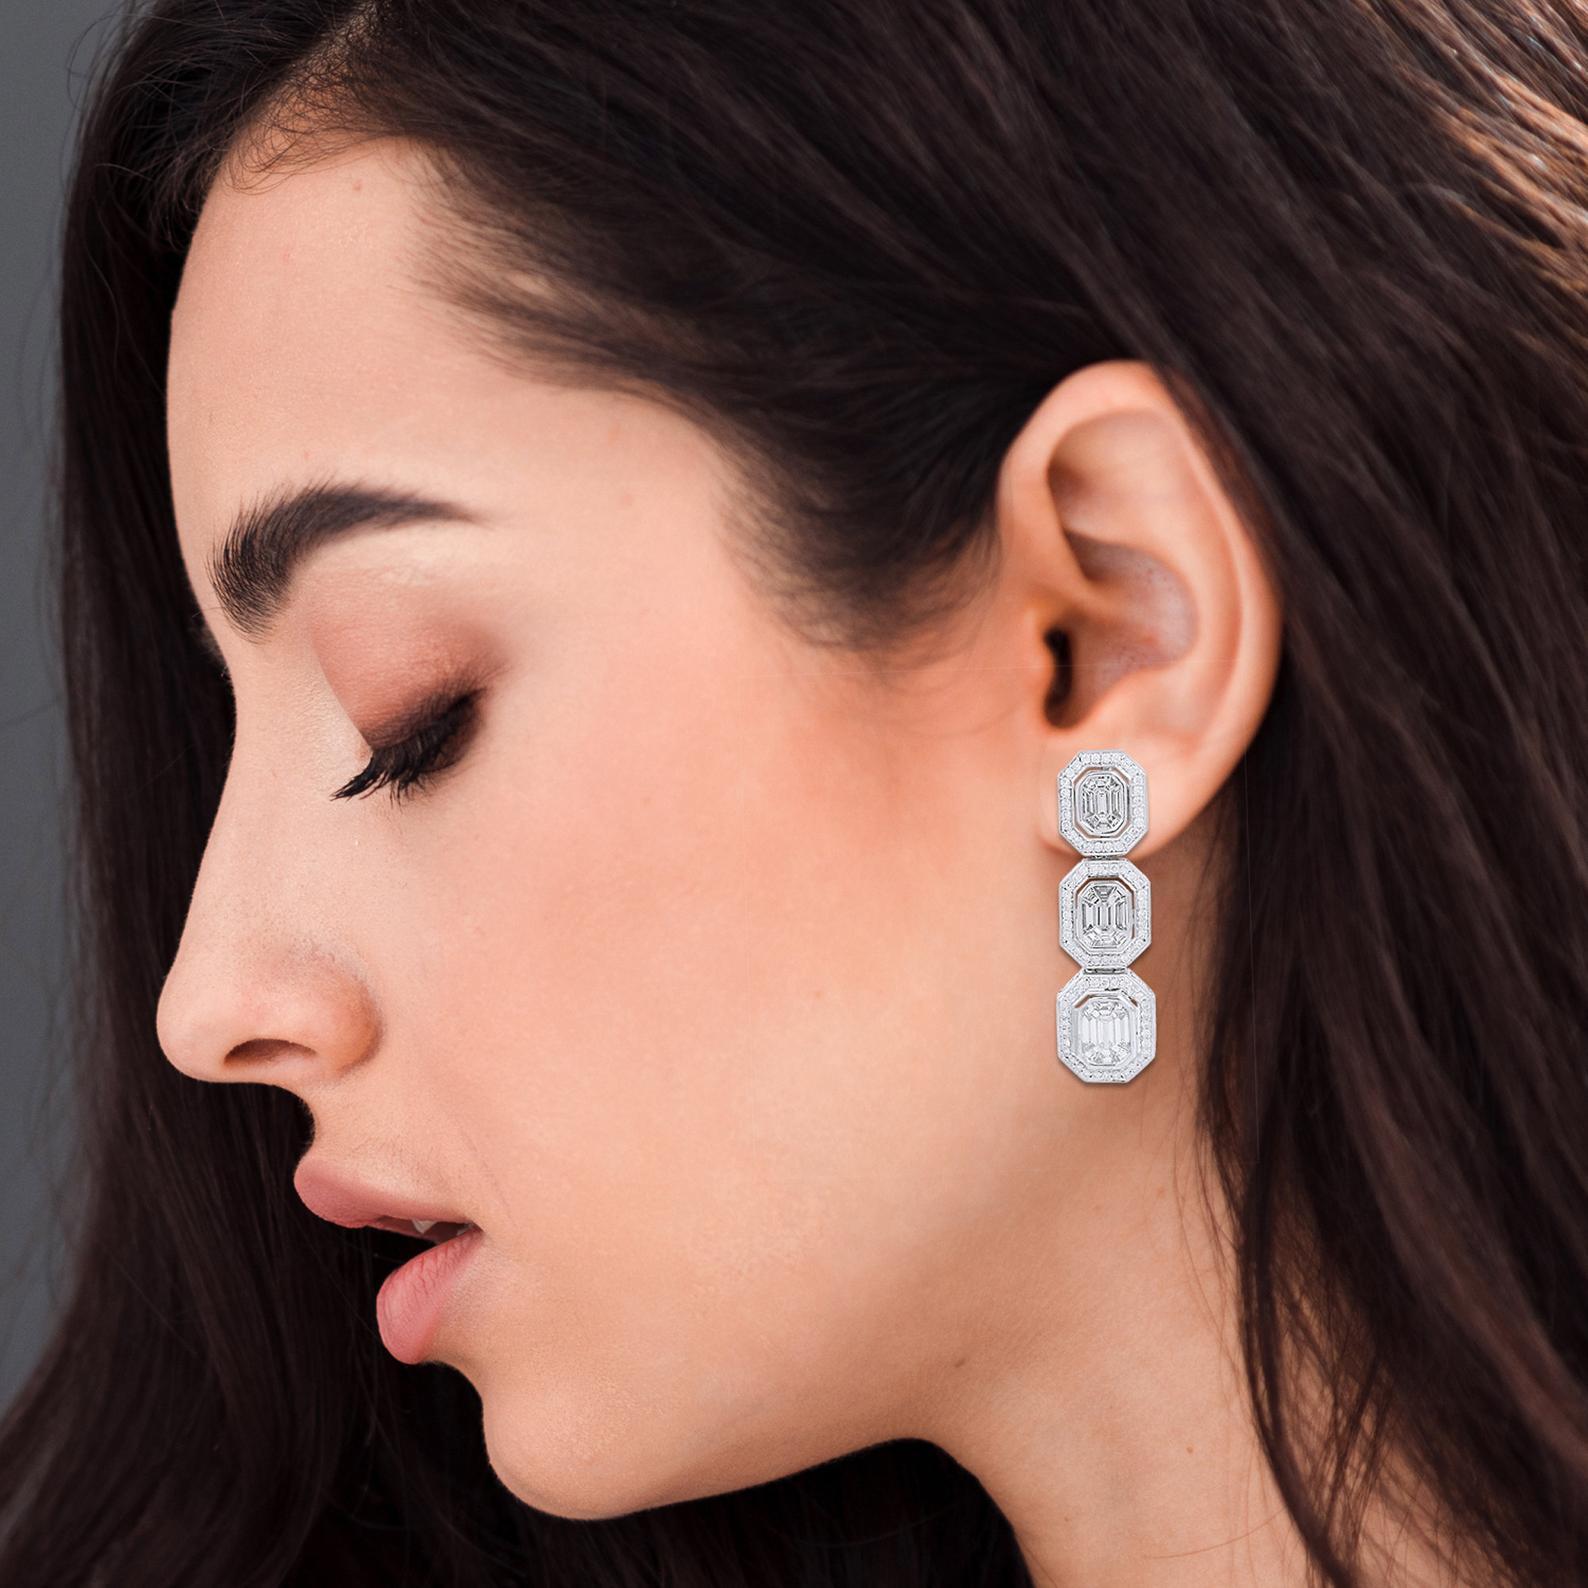 These exquisite emerald cut earrings are handcrafted in 14-karat white gold and set in 4.20 carats of sparkling diamonds. 

FOLLOW MEGHNA JEWELS storefront to view the latest collection & exclusive pieces. Meghna Jewels is proudly rated as a Top